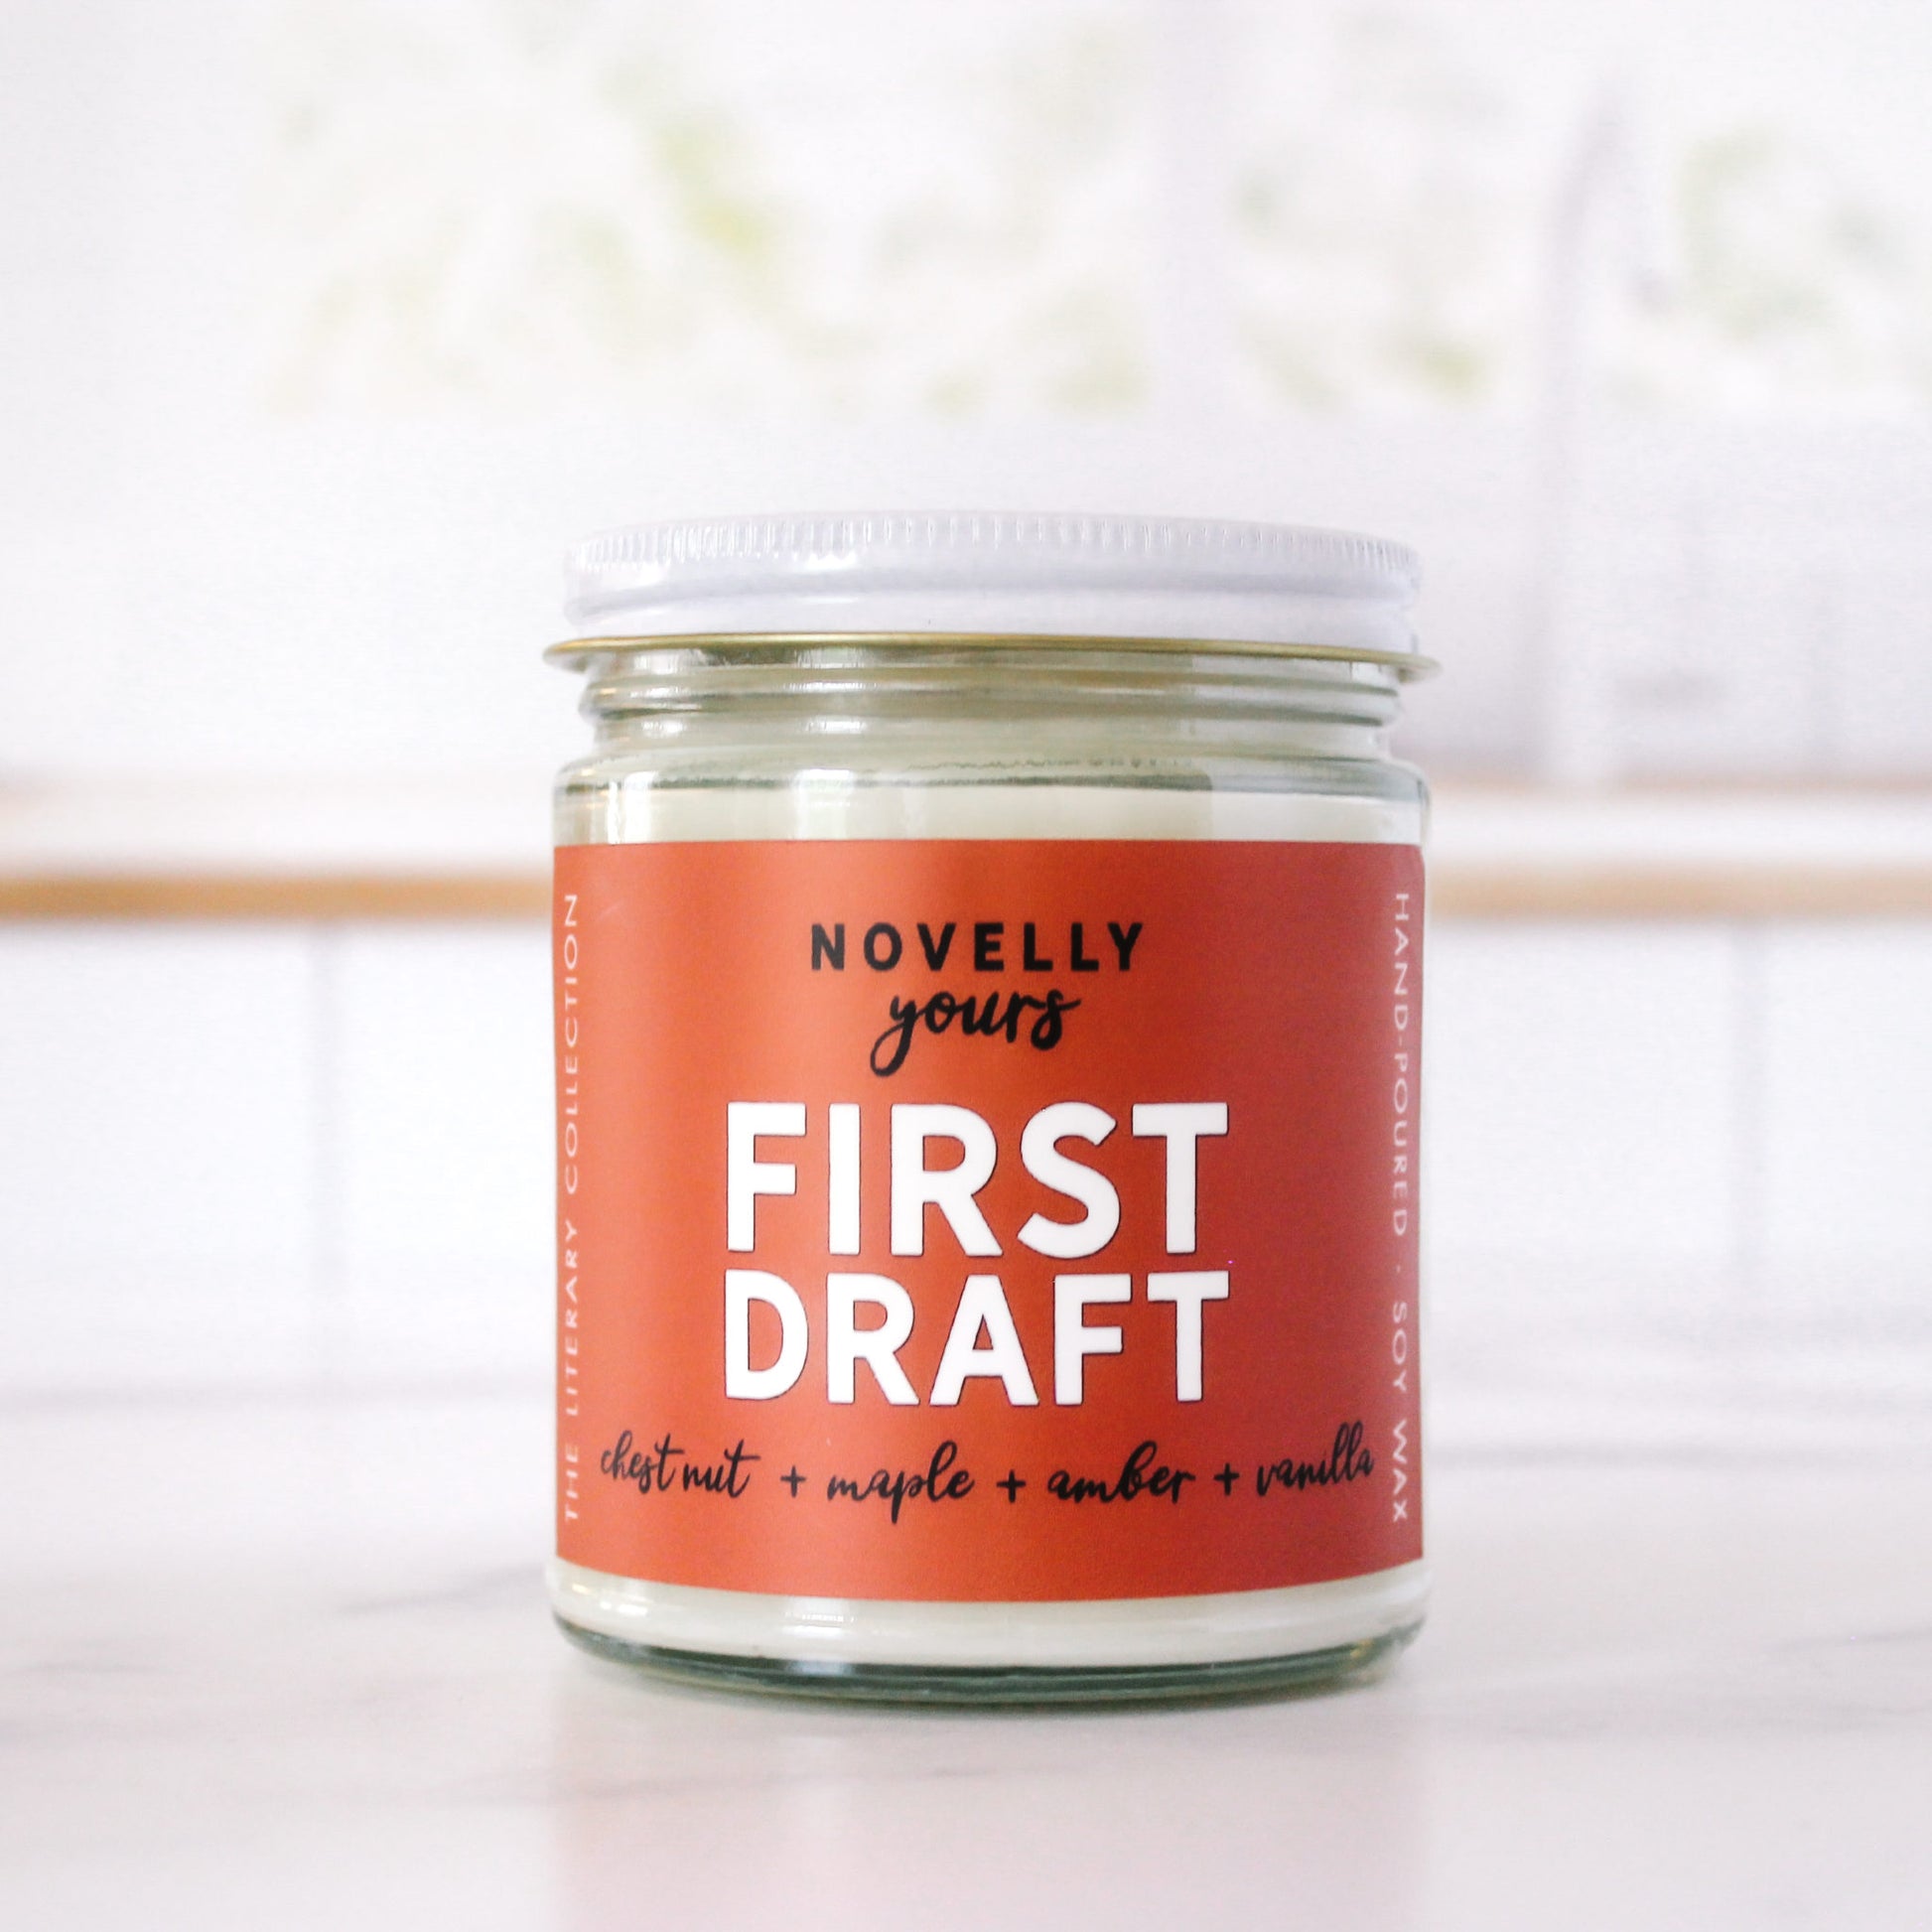 bookish candle "First Draft" with rusty orange label sits in front of clean kitchen background on marble countertop